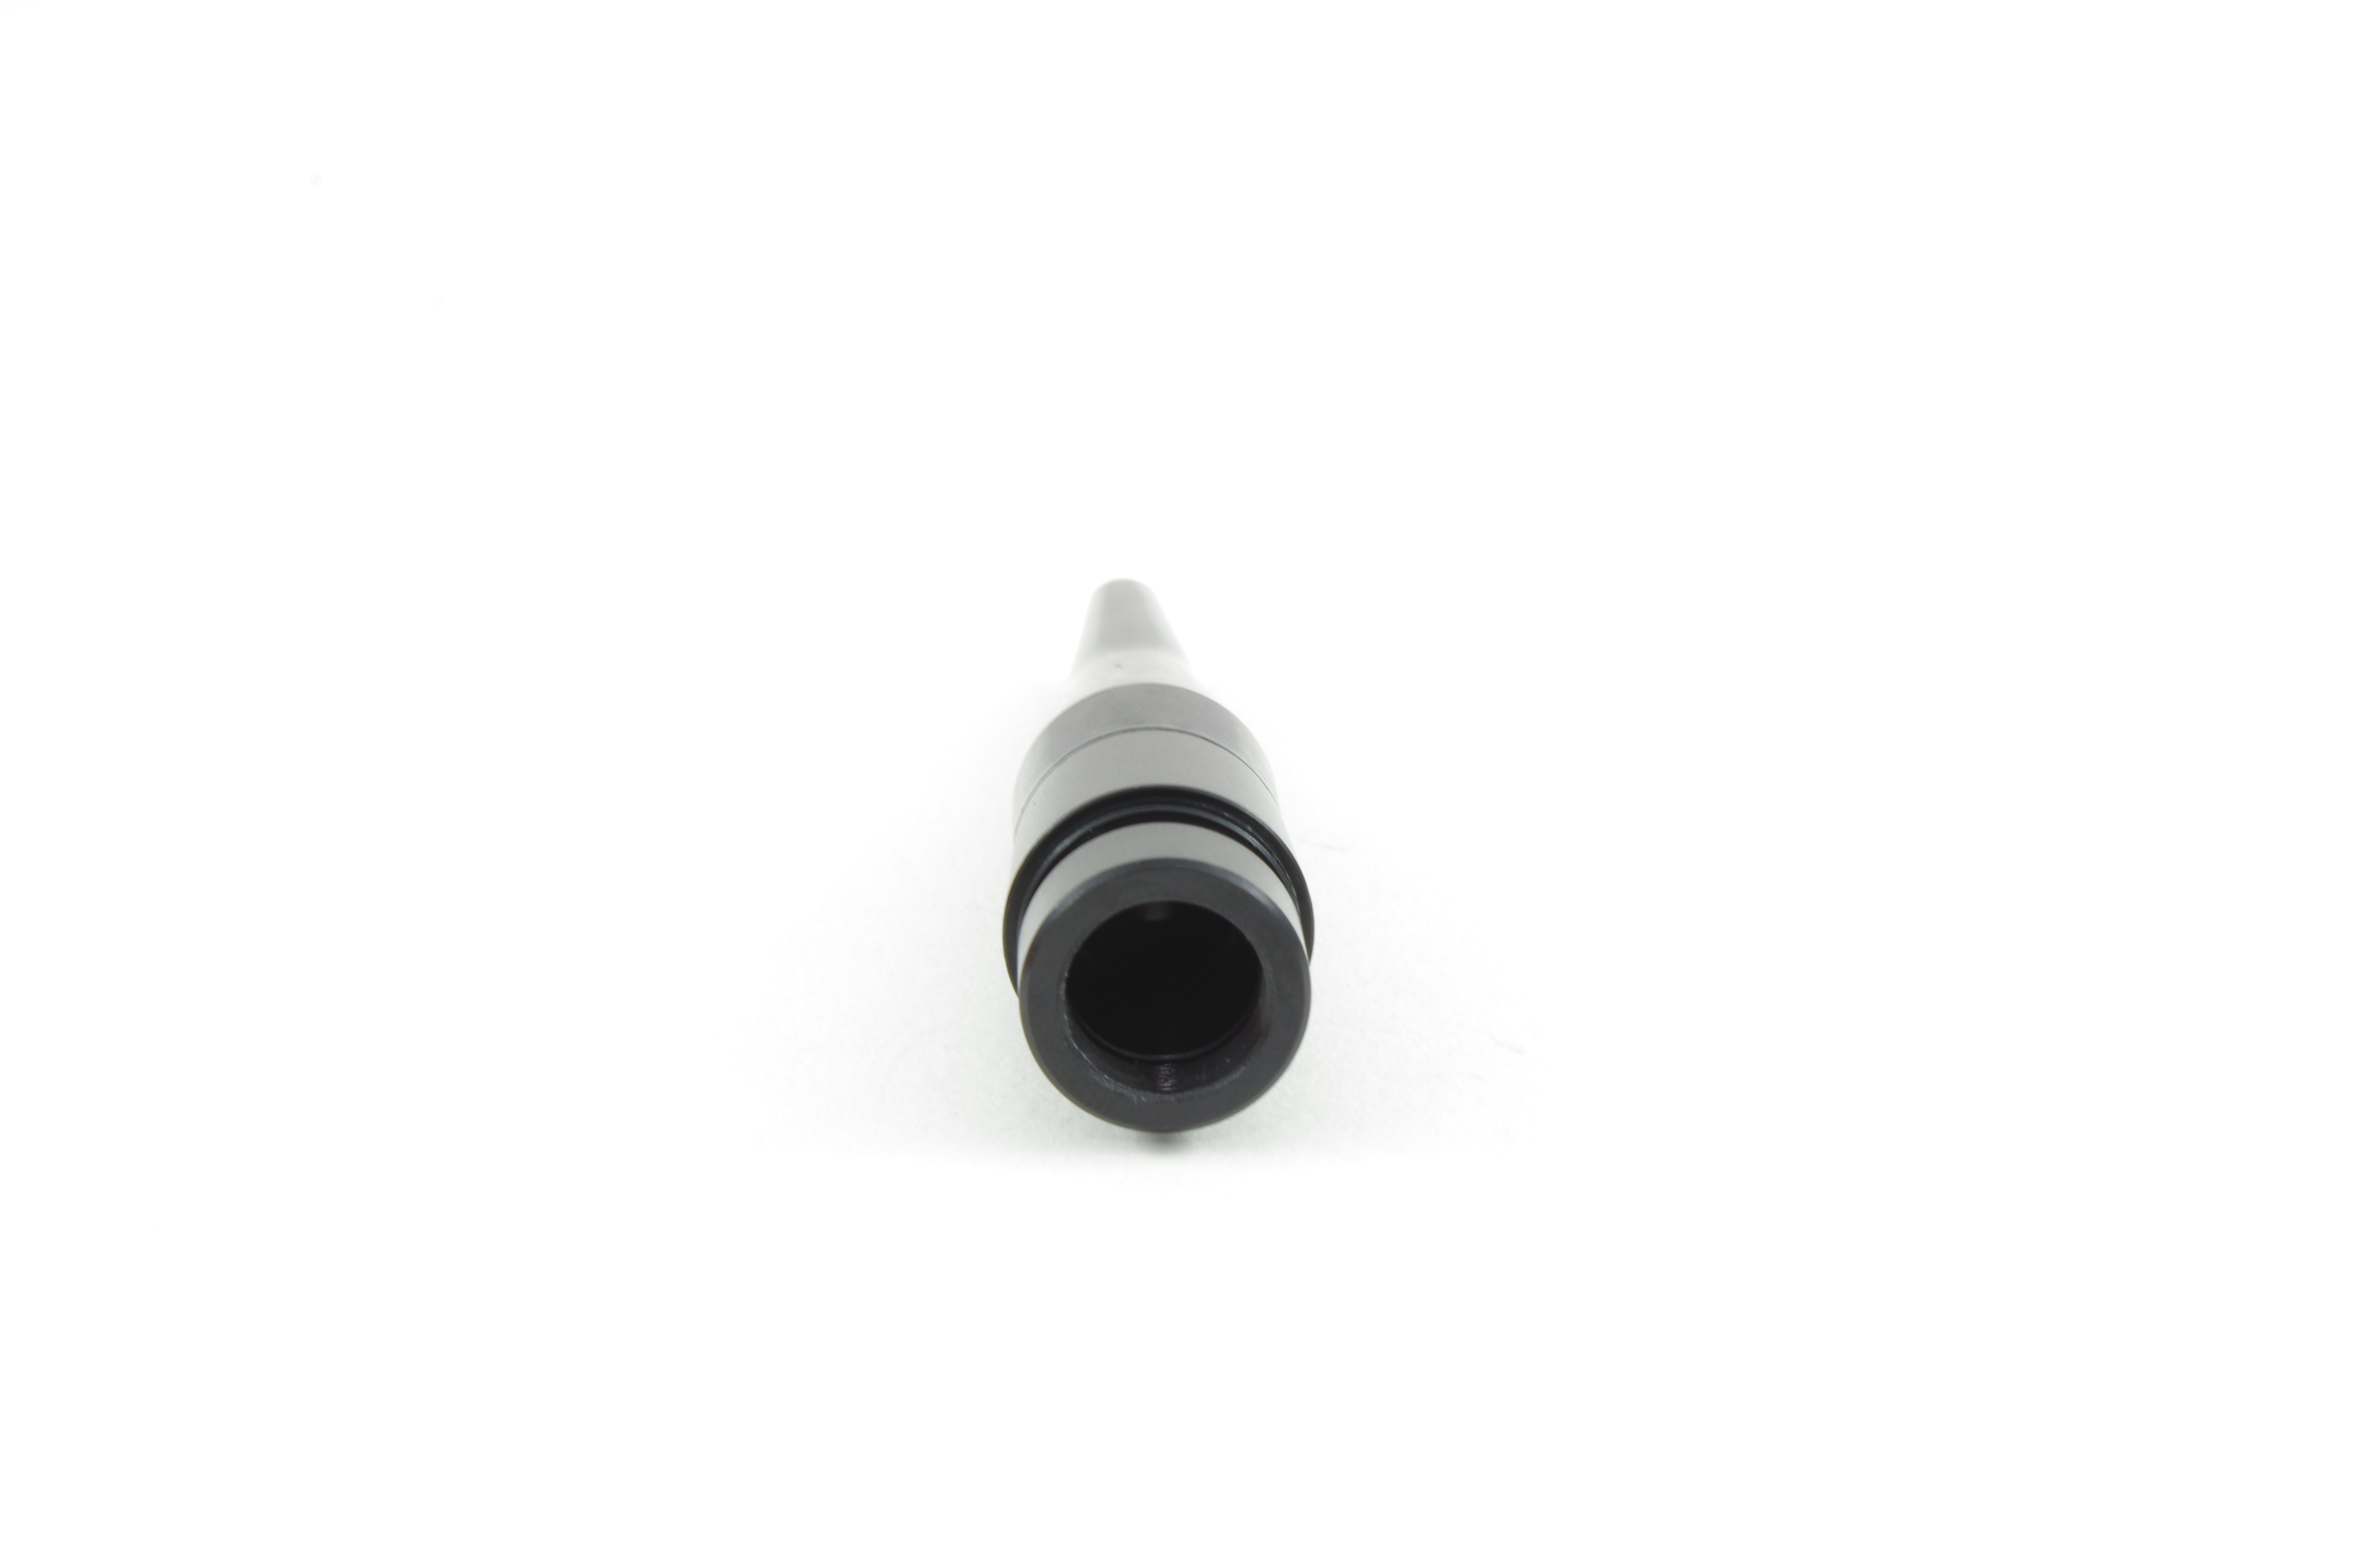 OEM Insertion Tube Boot with Nut - ENF-P3, ENF-P4, LF-1, LF-2